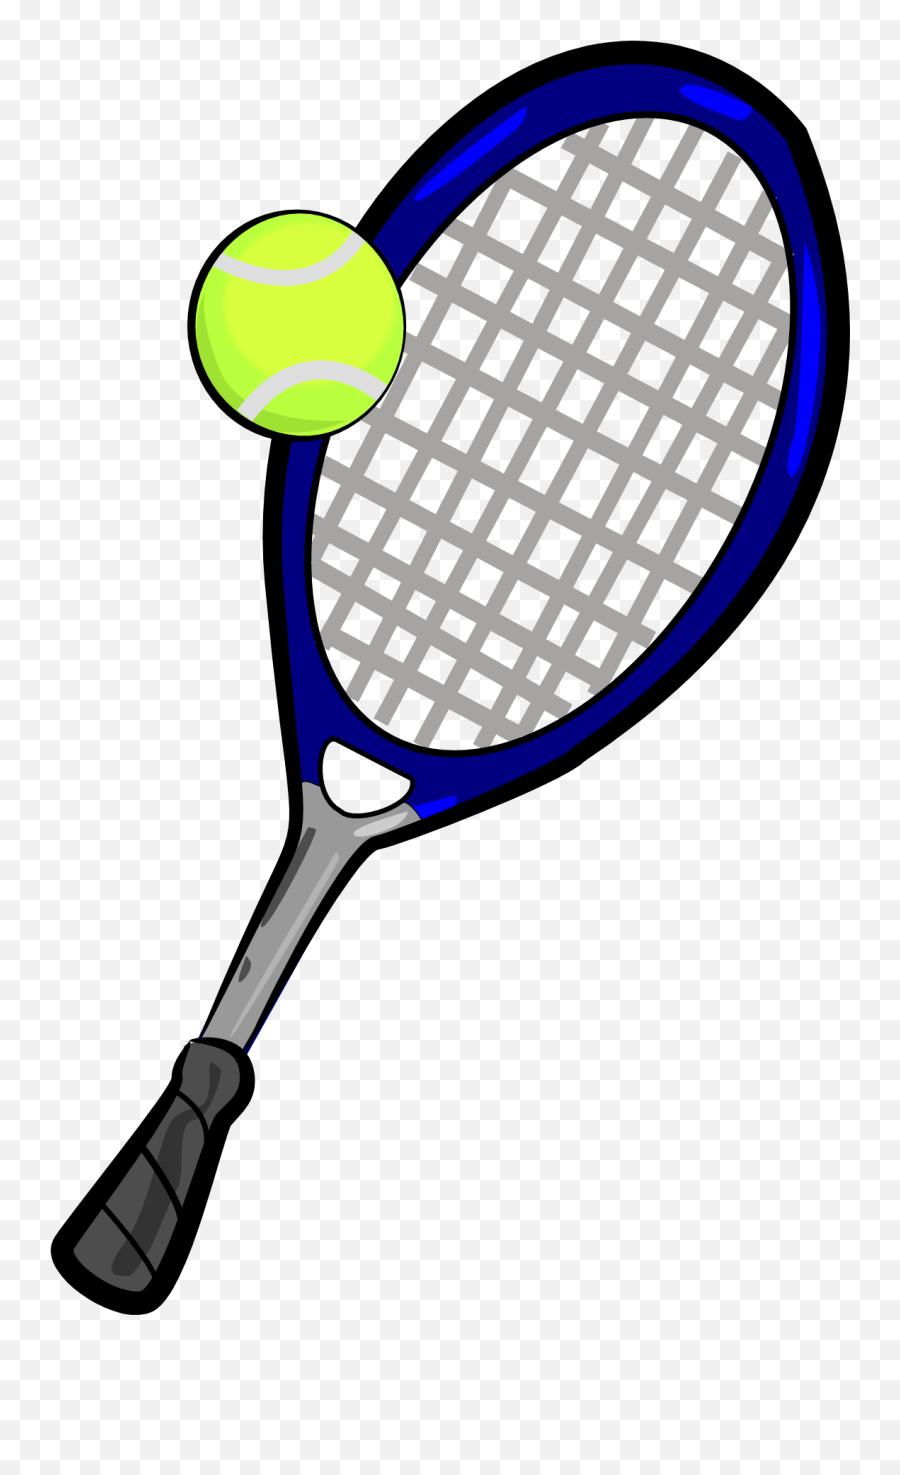 My Favorite Male Players December 21 - For Tennis Emoji,Tennis Players On Managing Emotions